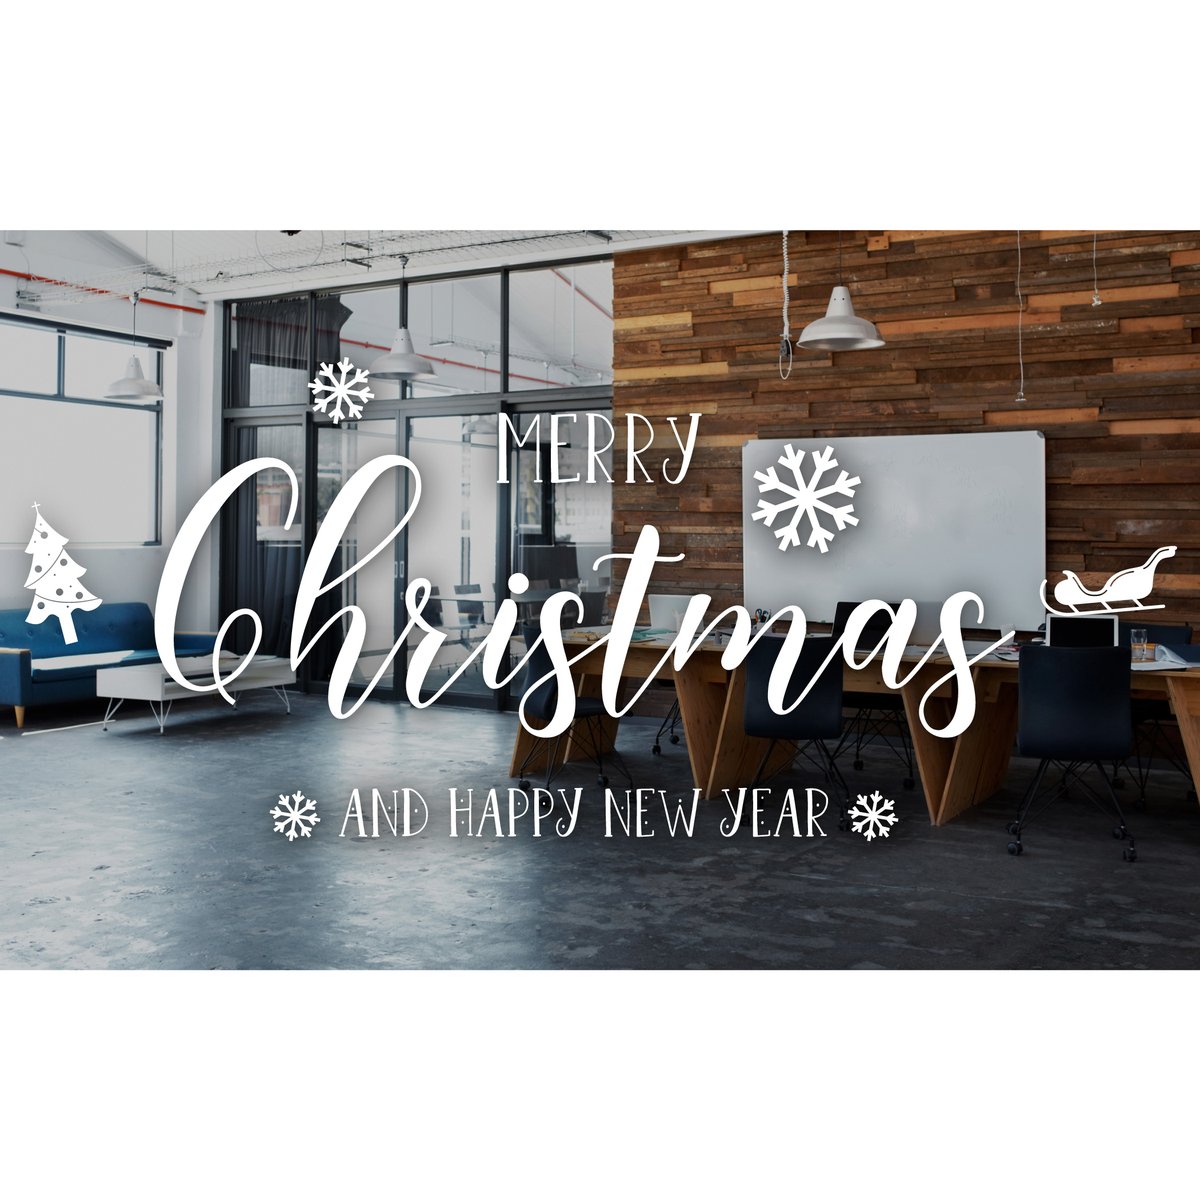 Wishing you a very Merry Christmas, and a safe and healthy 2021.

#happyholidays #christmas #renovations #office #officerenovations  #buildingmaintenance #buildingupgrade #buildingrepairs #tenantimprovement #designbuild #renovation #contractor #construction #sierraprojects